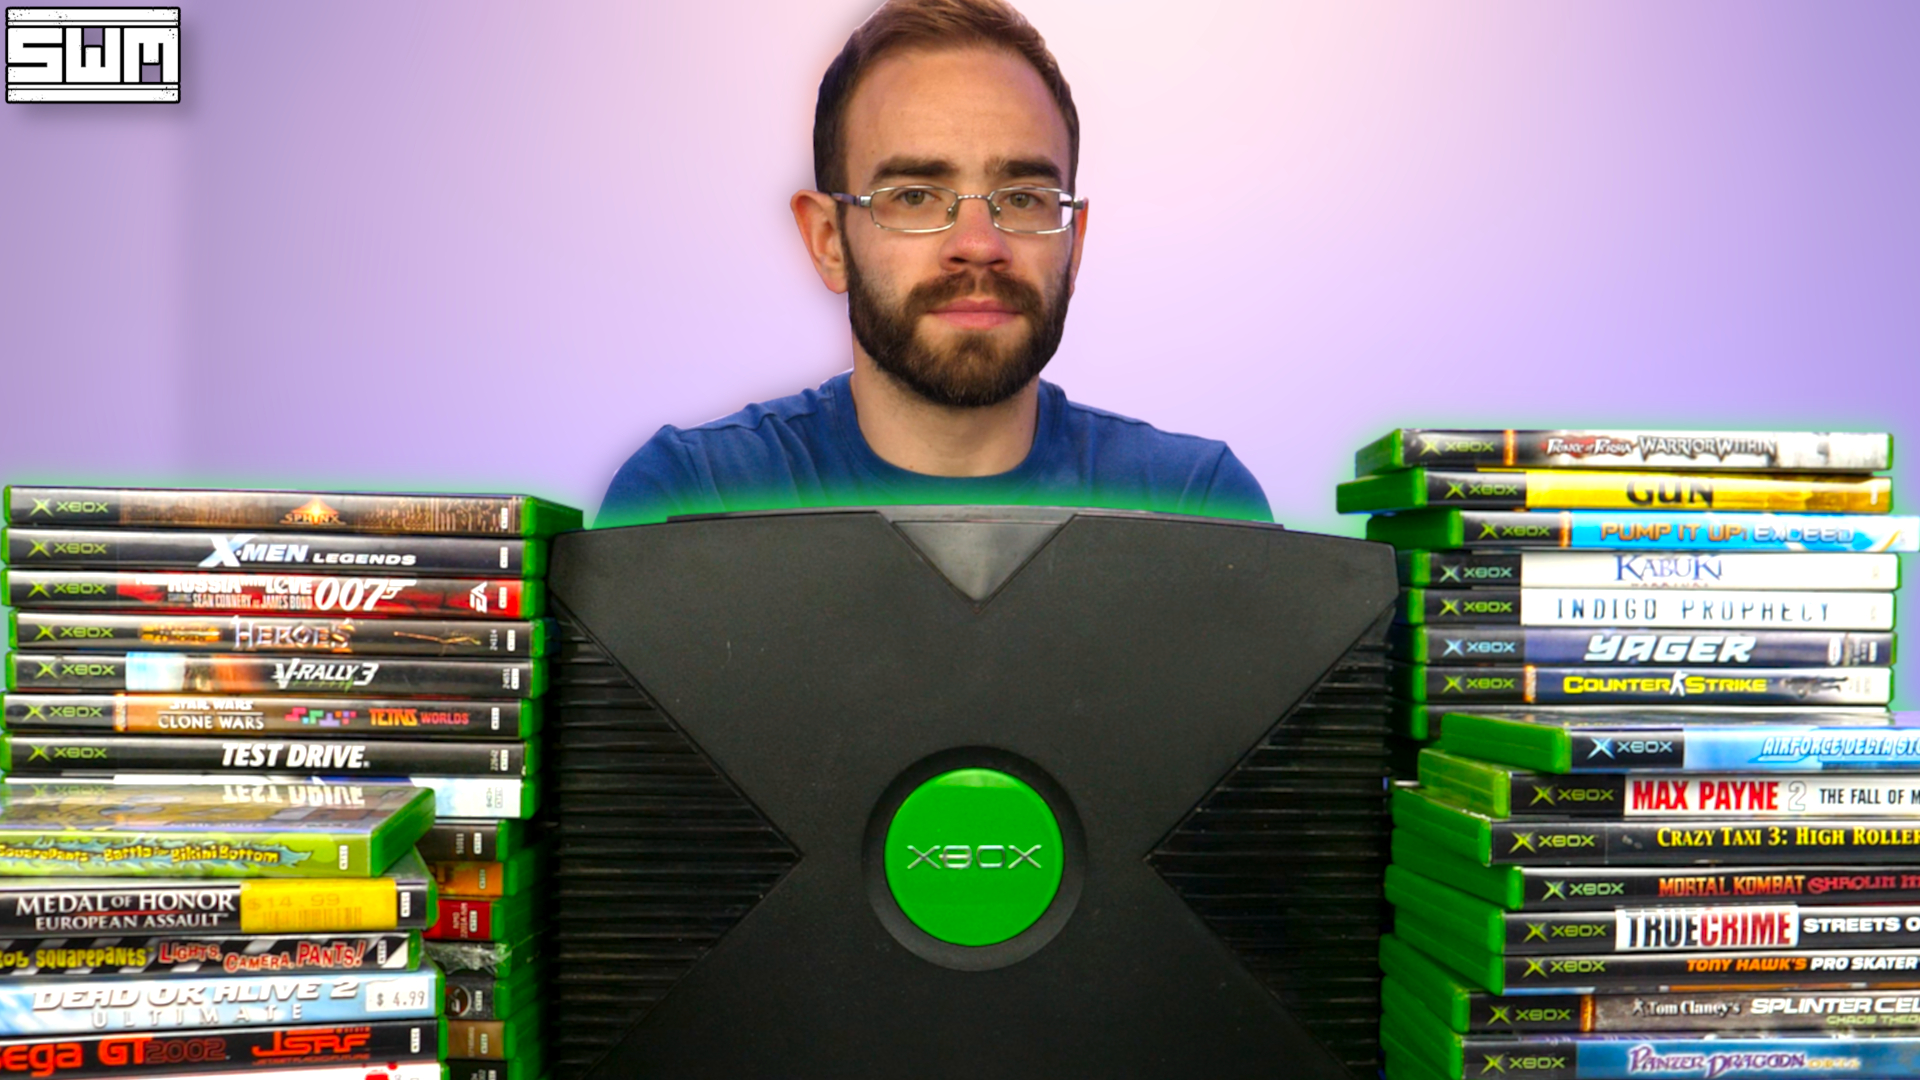 I Bought An Xbox 360 In 2022 - Here's Why! 